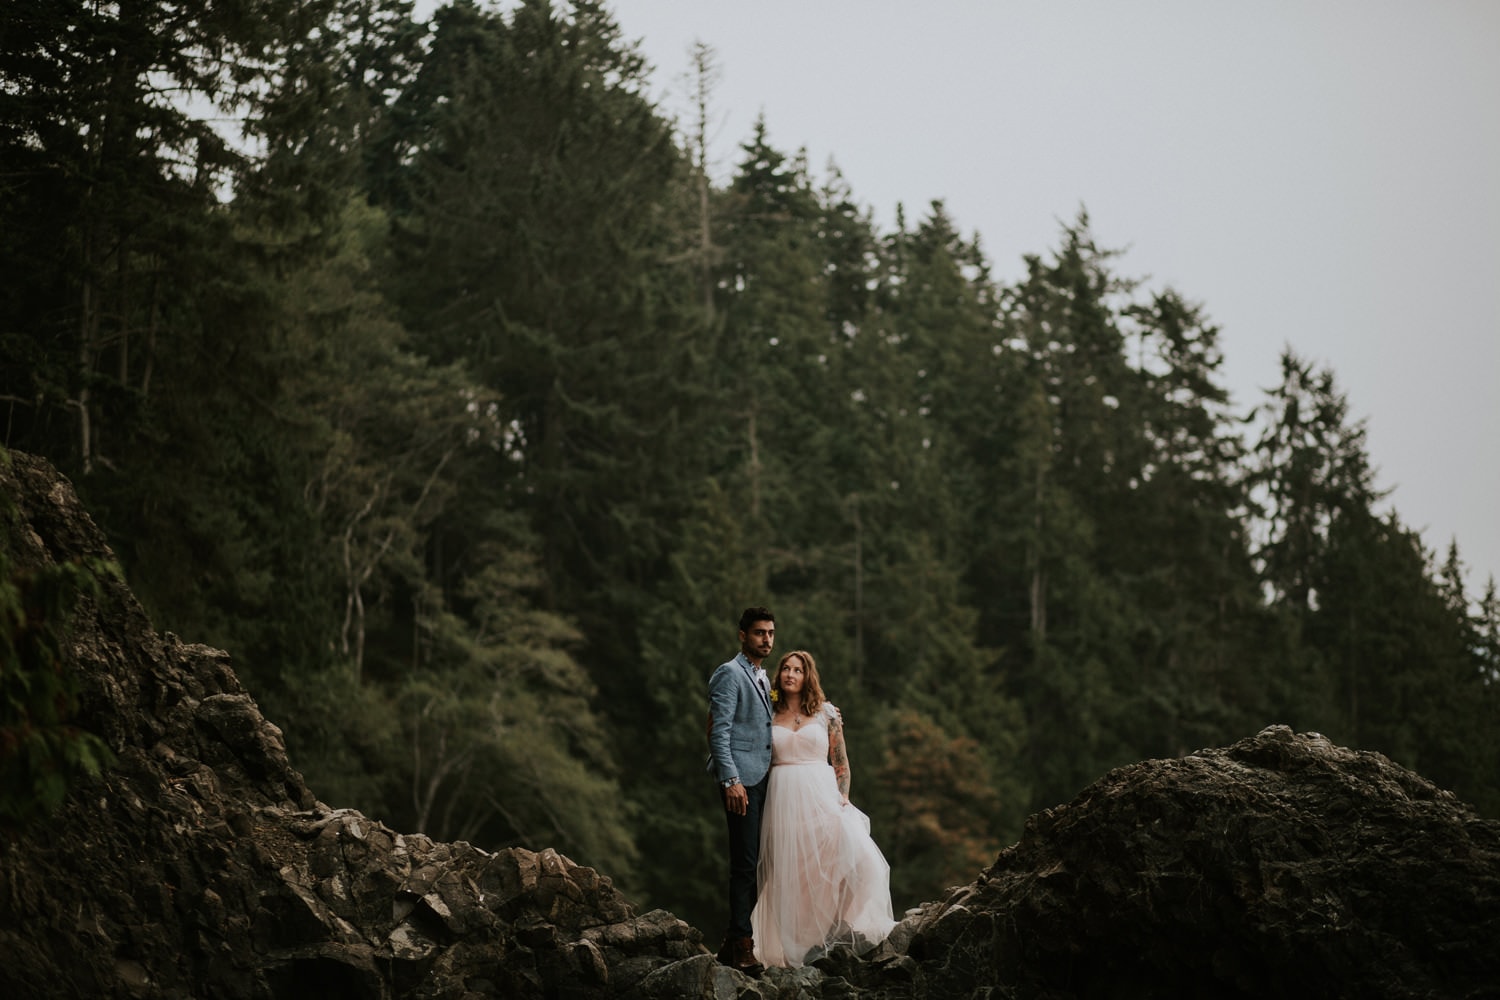 newlywed couple tattoo pink wedding dress pacific northwest forest trees olympic peninsula elopement by marcela pulido portland oregon wedding and elopement photographer